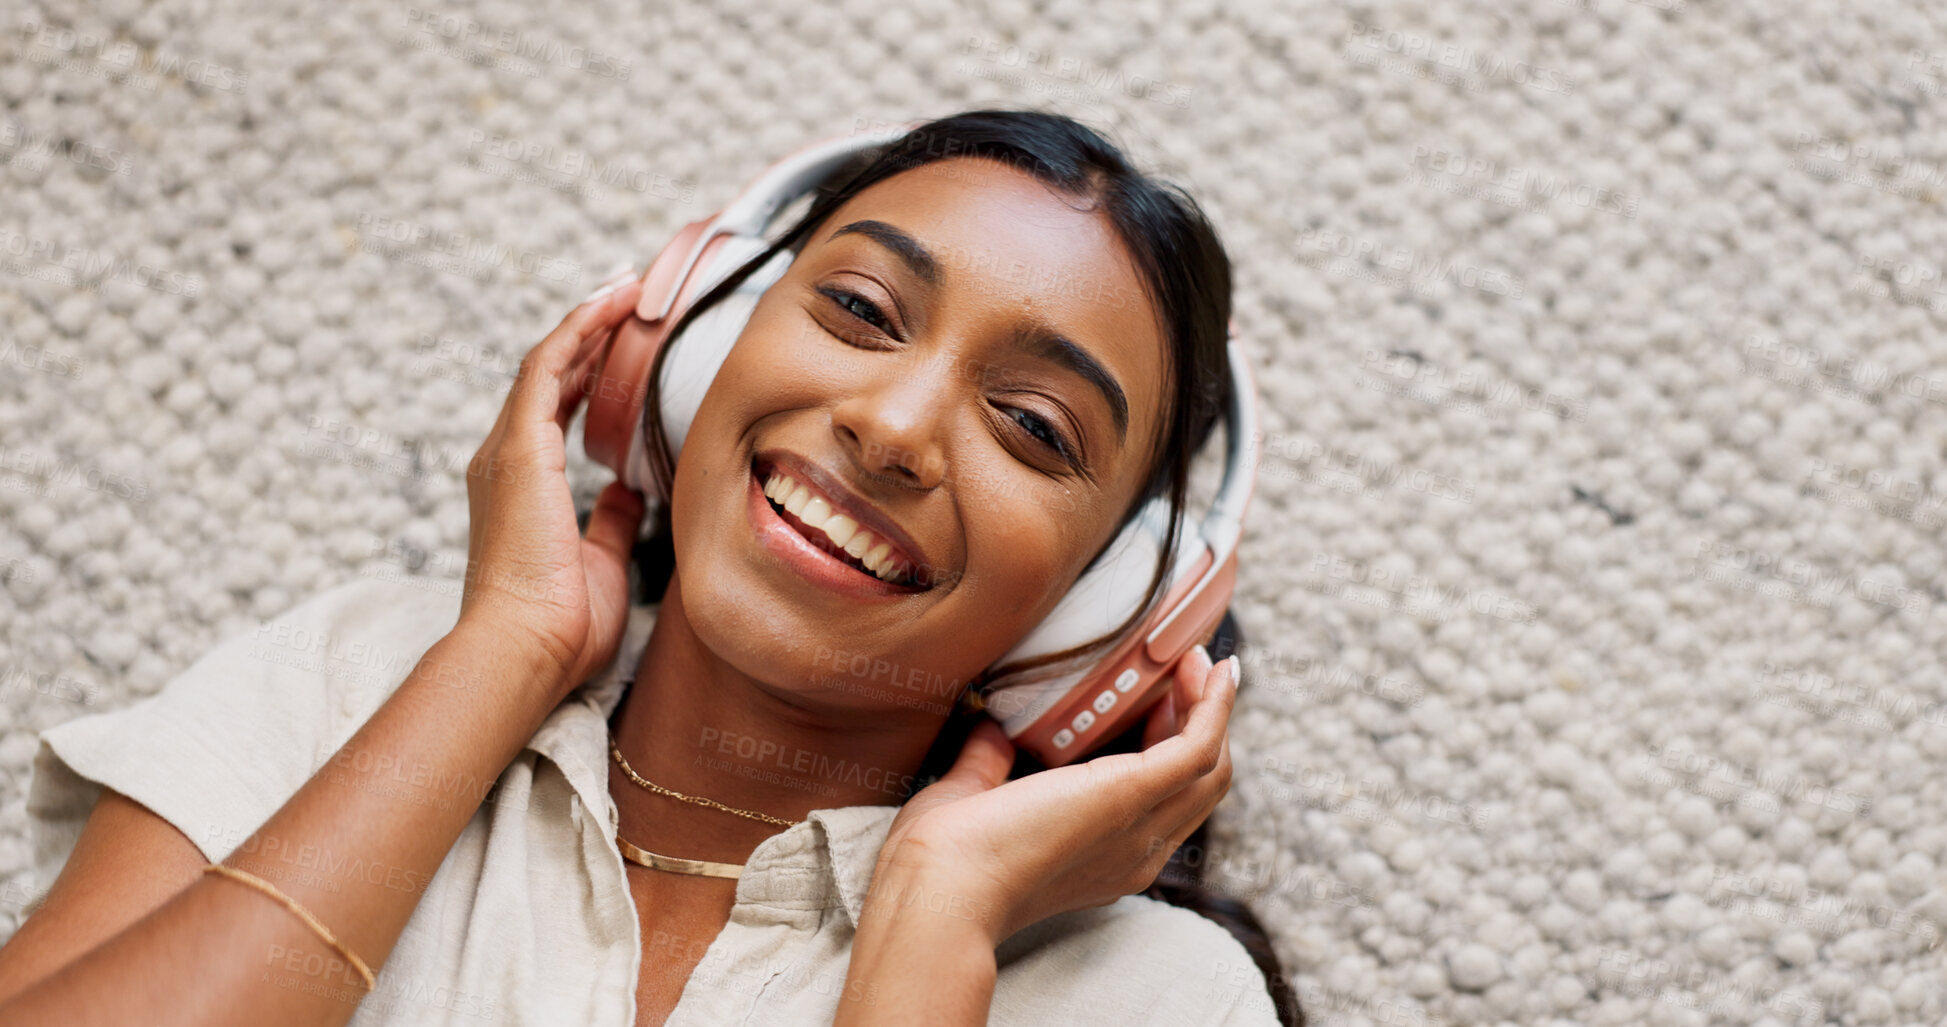 Buy stock photo Headphones, smile and portrait of woman in the living room relaxing on mat on floor. Happy, calm and Indian female person listen to podcast, radio or music and chilling in lounge at home from above.